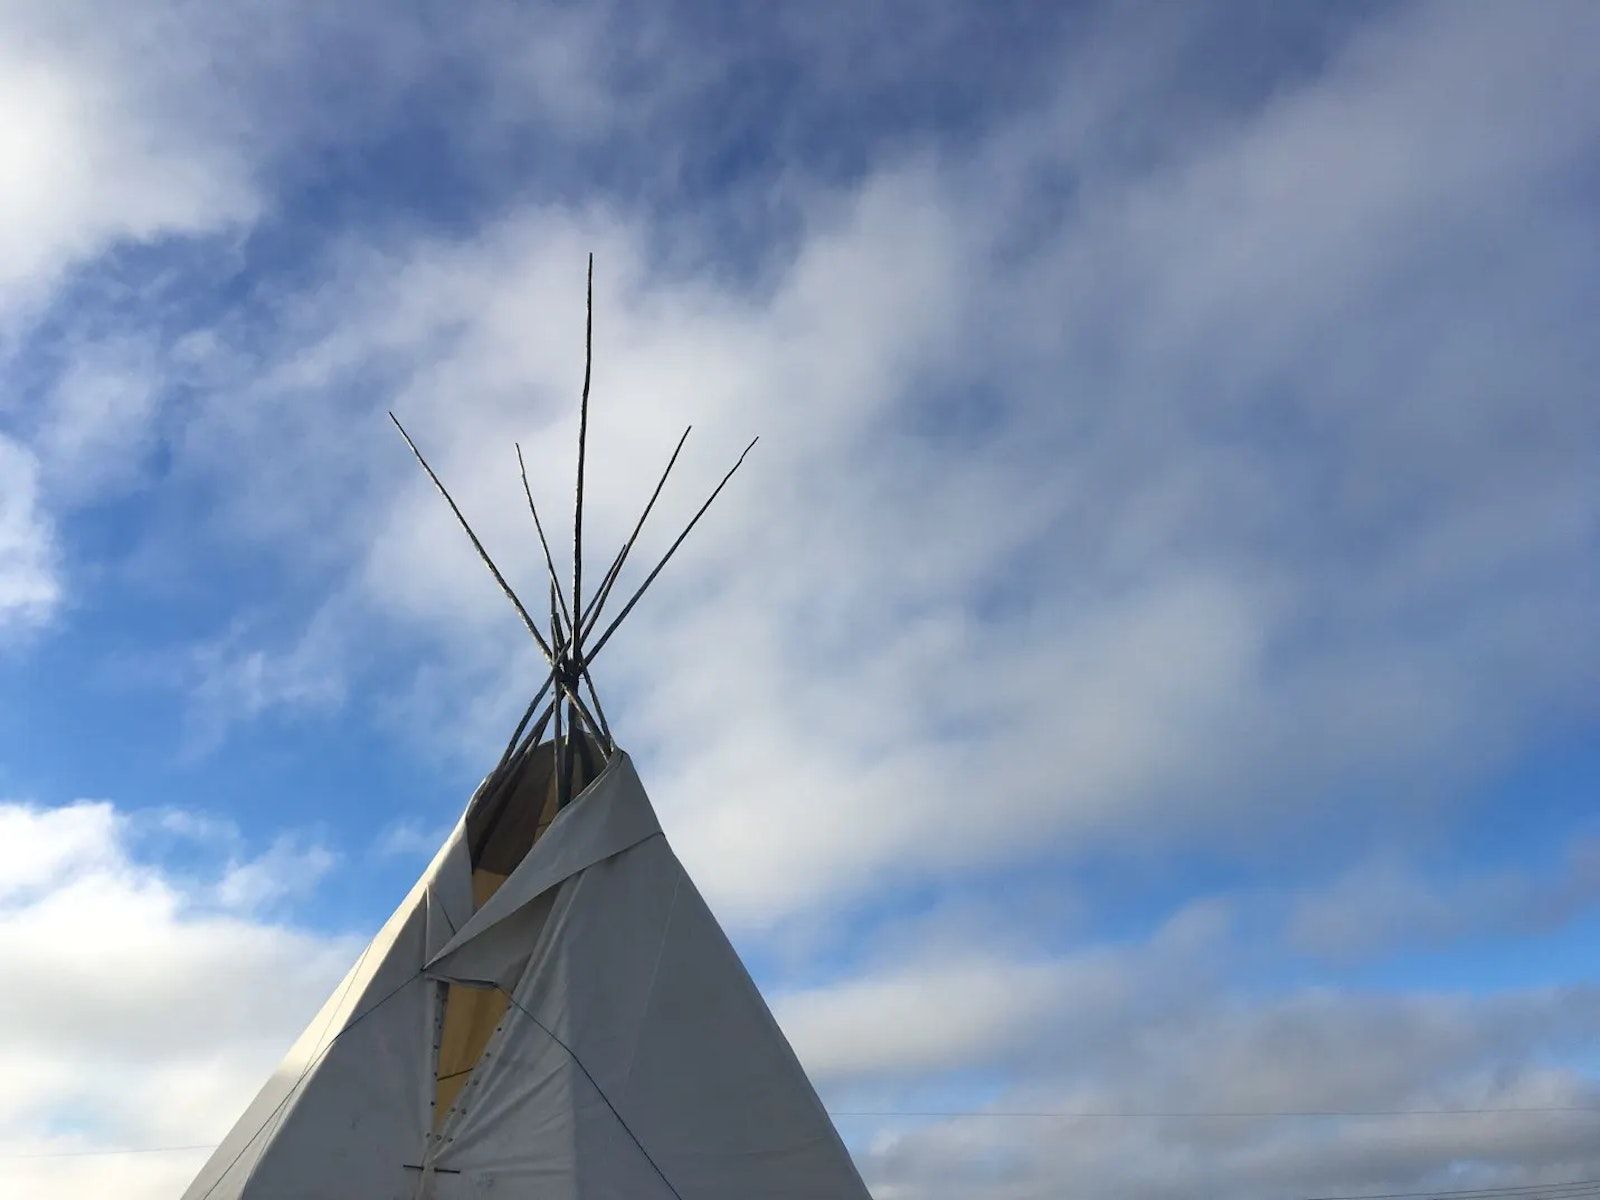 Top of a teepee with clouds and blue sky in the background